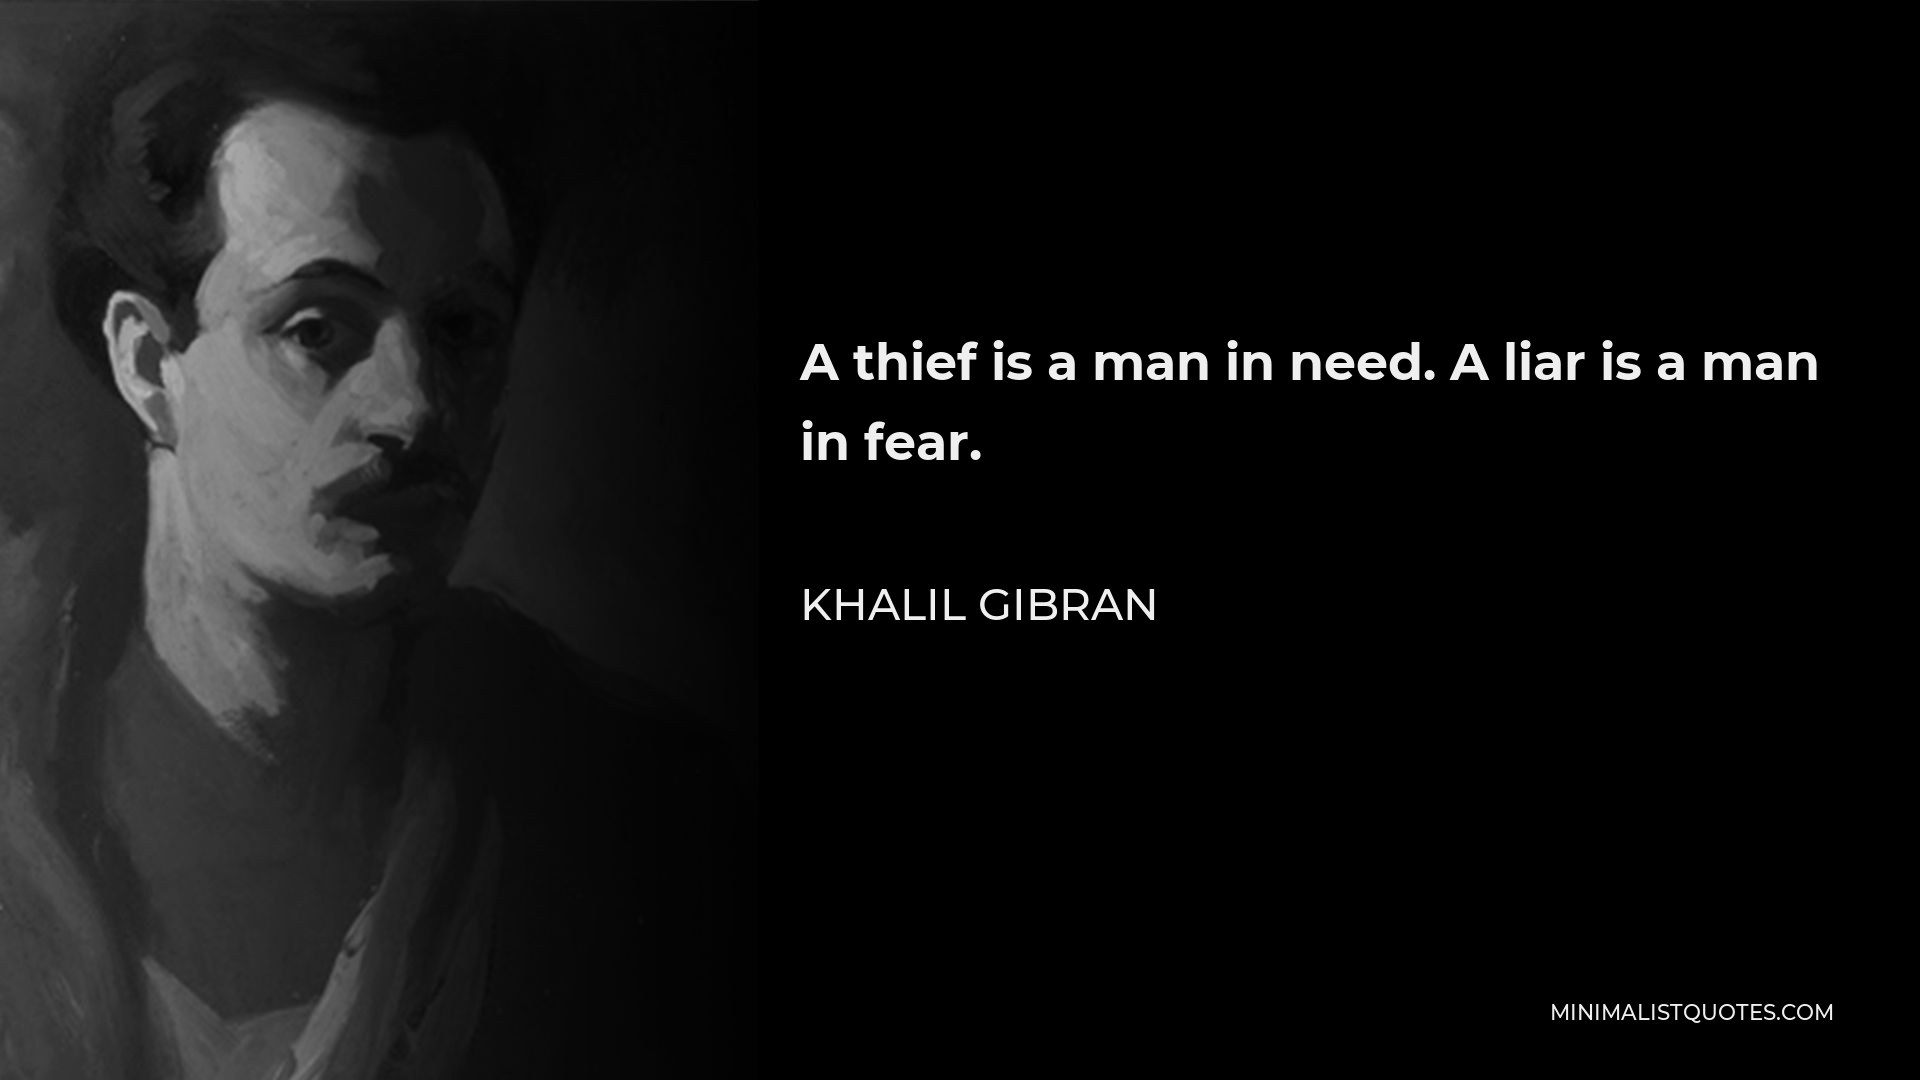 Khalil Gibran Quote - A thief is a man in need. A liar is a man in fear.